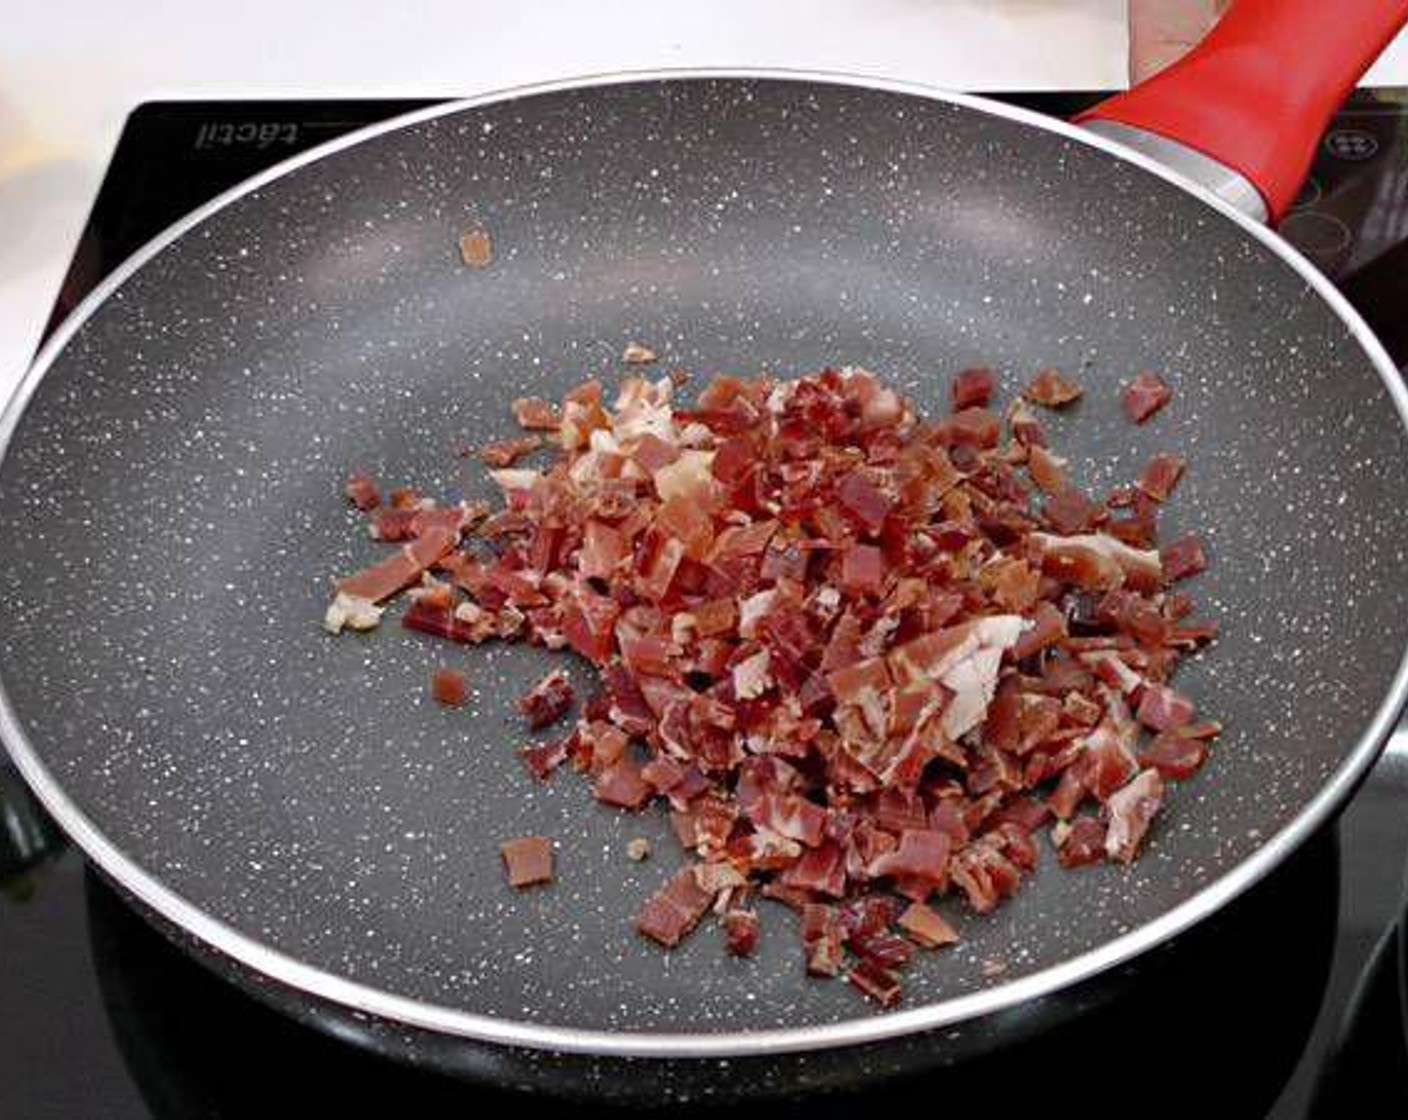 step 2 Quickly fry the finely chopped serrano ham in a hot pan with a little bit of olive oil.